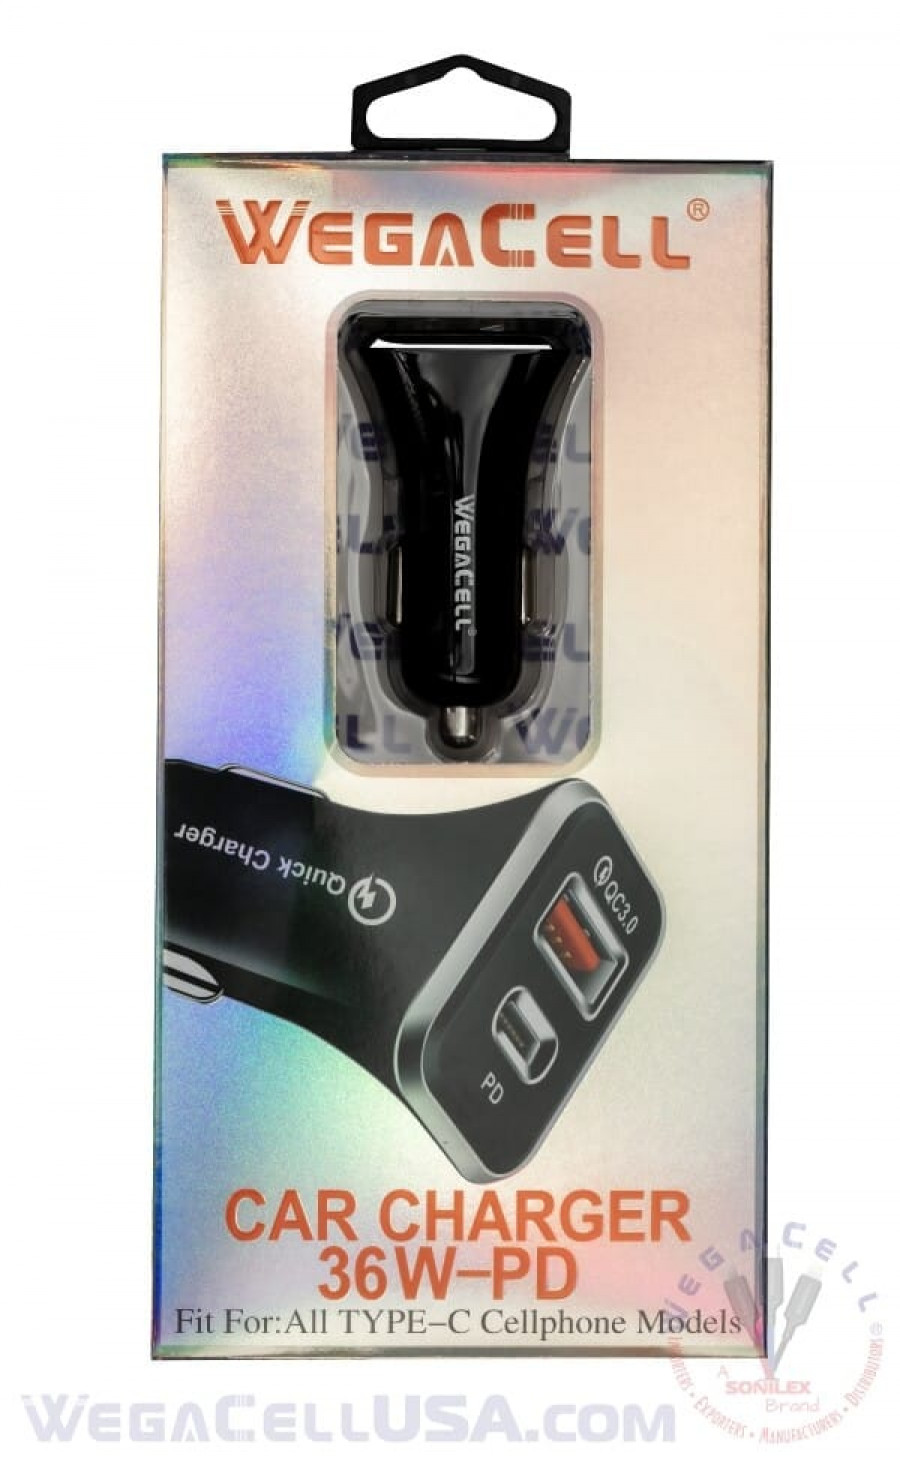 universal dual port fast charging usb - car charger - wholesale pkg wegacell: wl-80pd-dch car charger 24